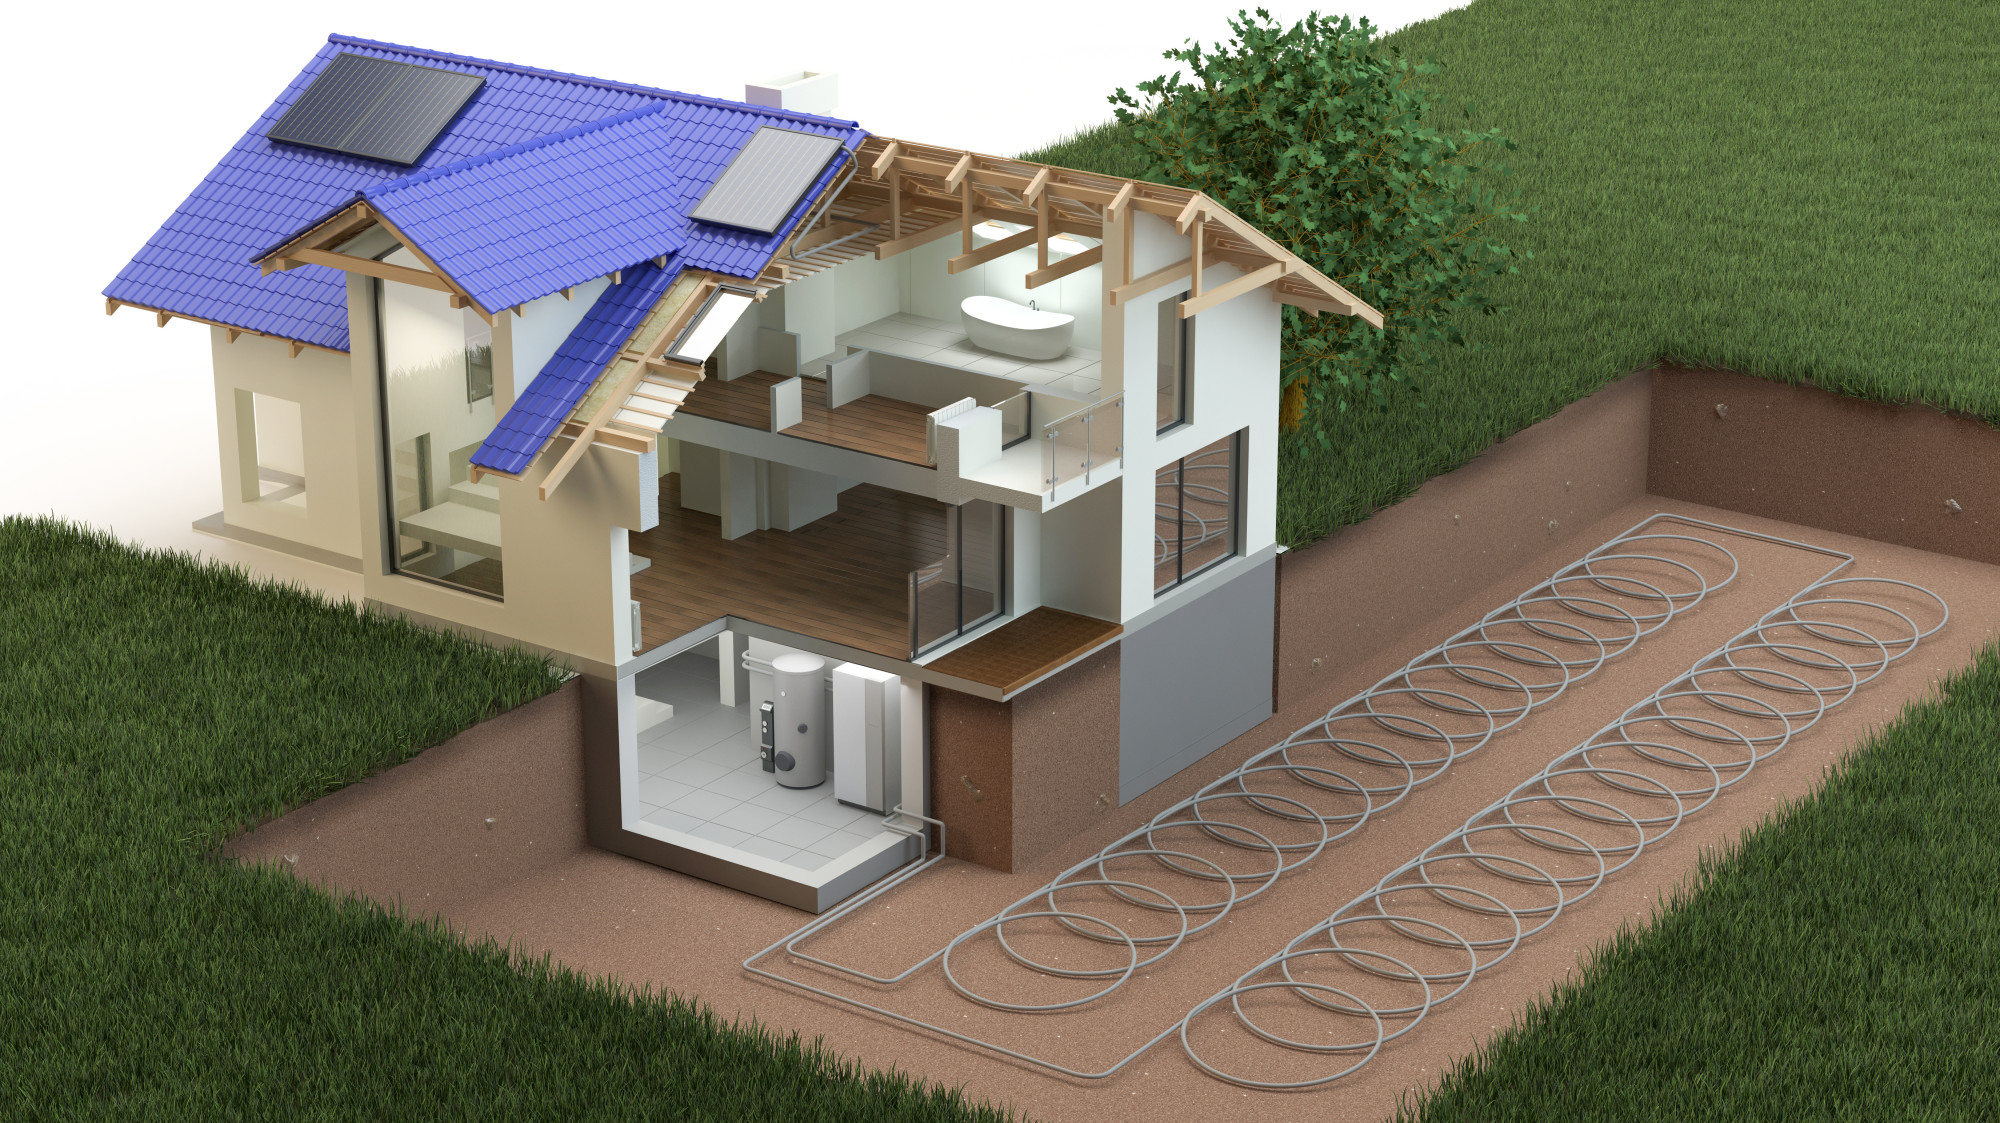 What Is a Geothermal System and How Can It Benefit Your Home?